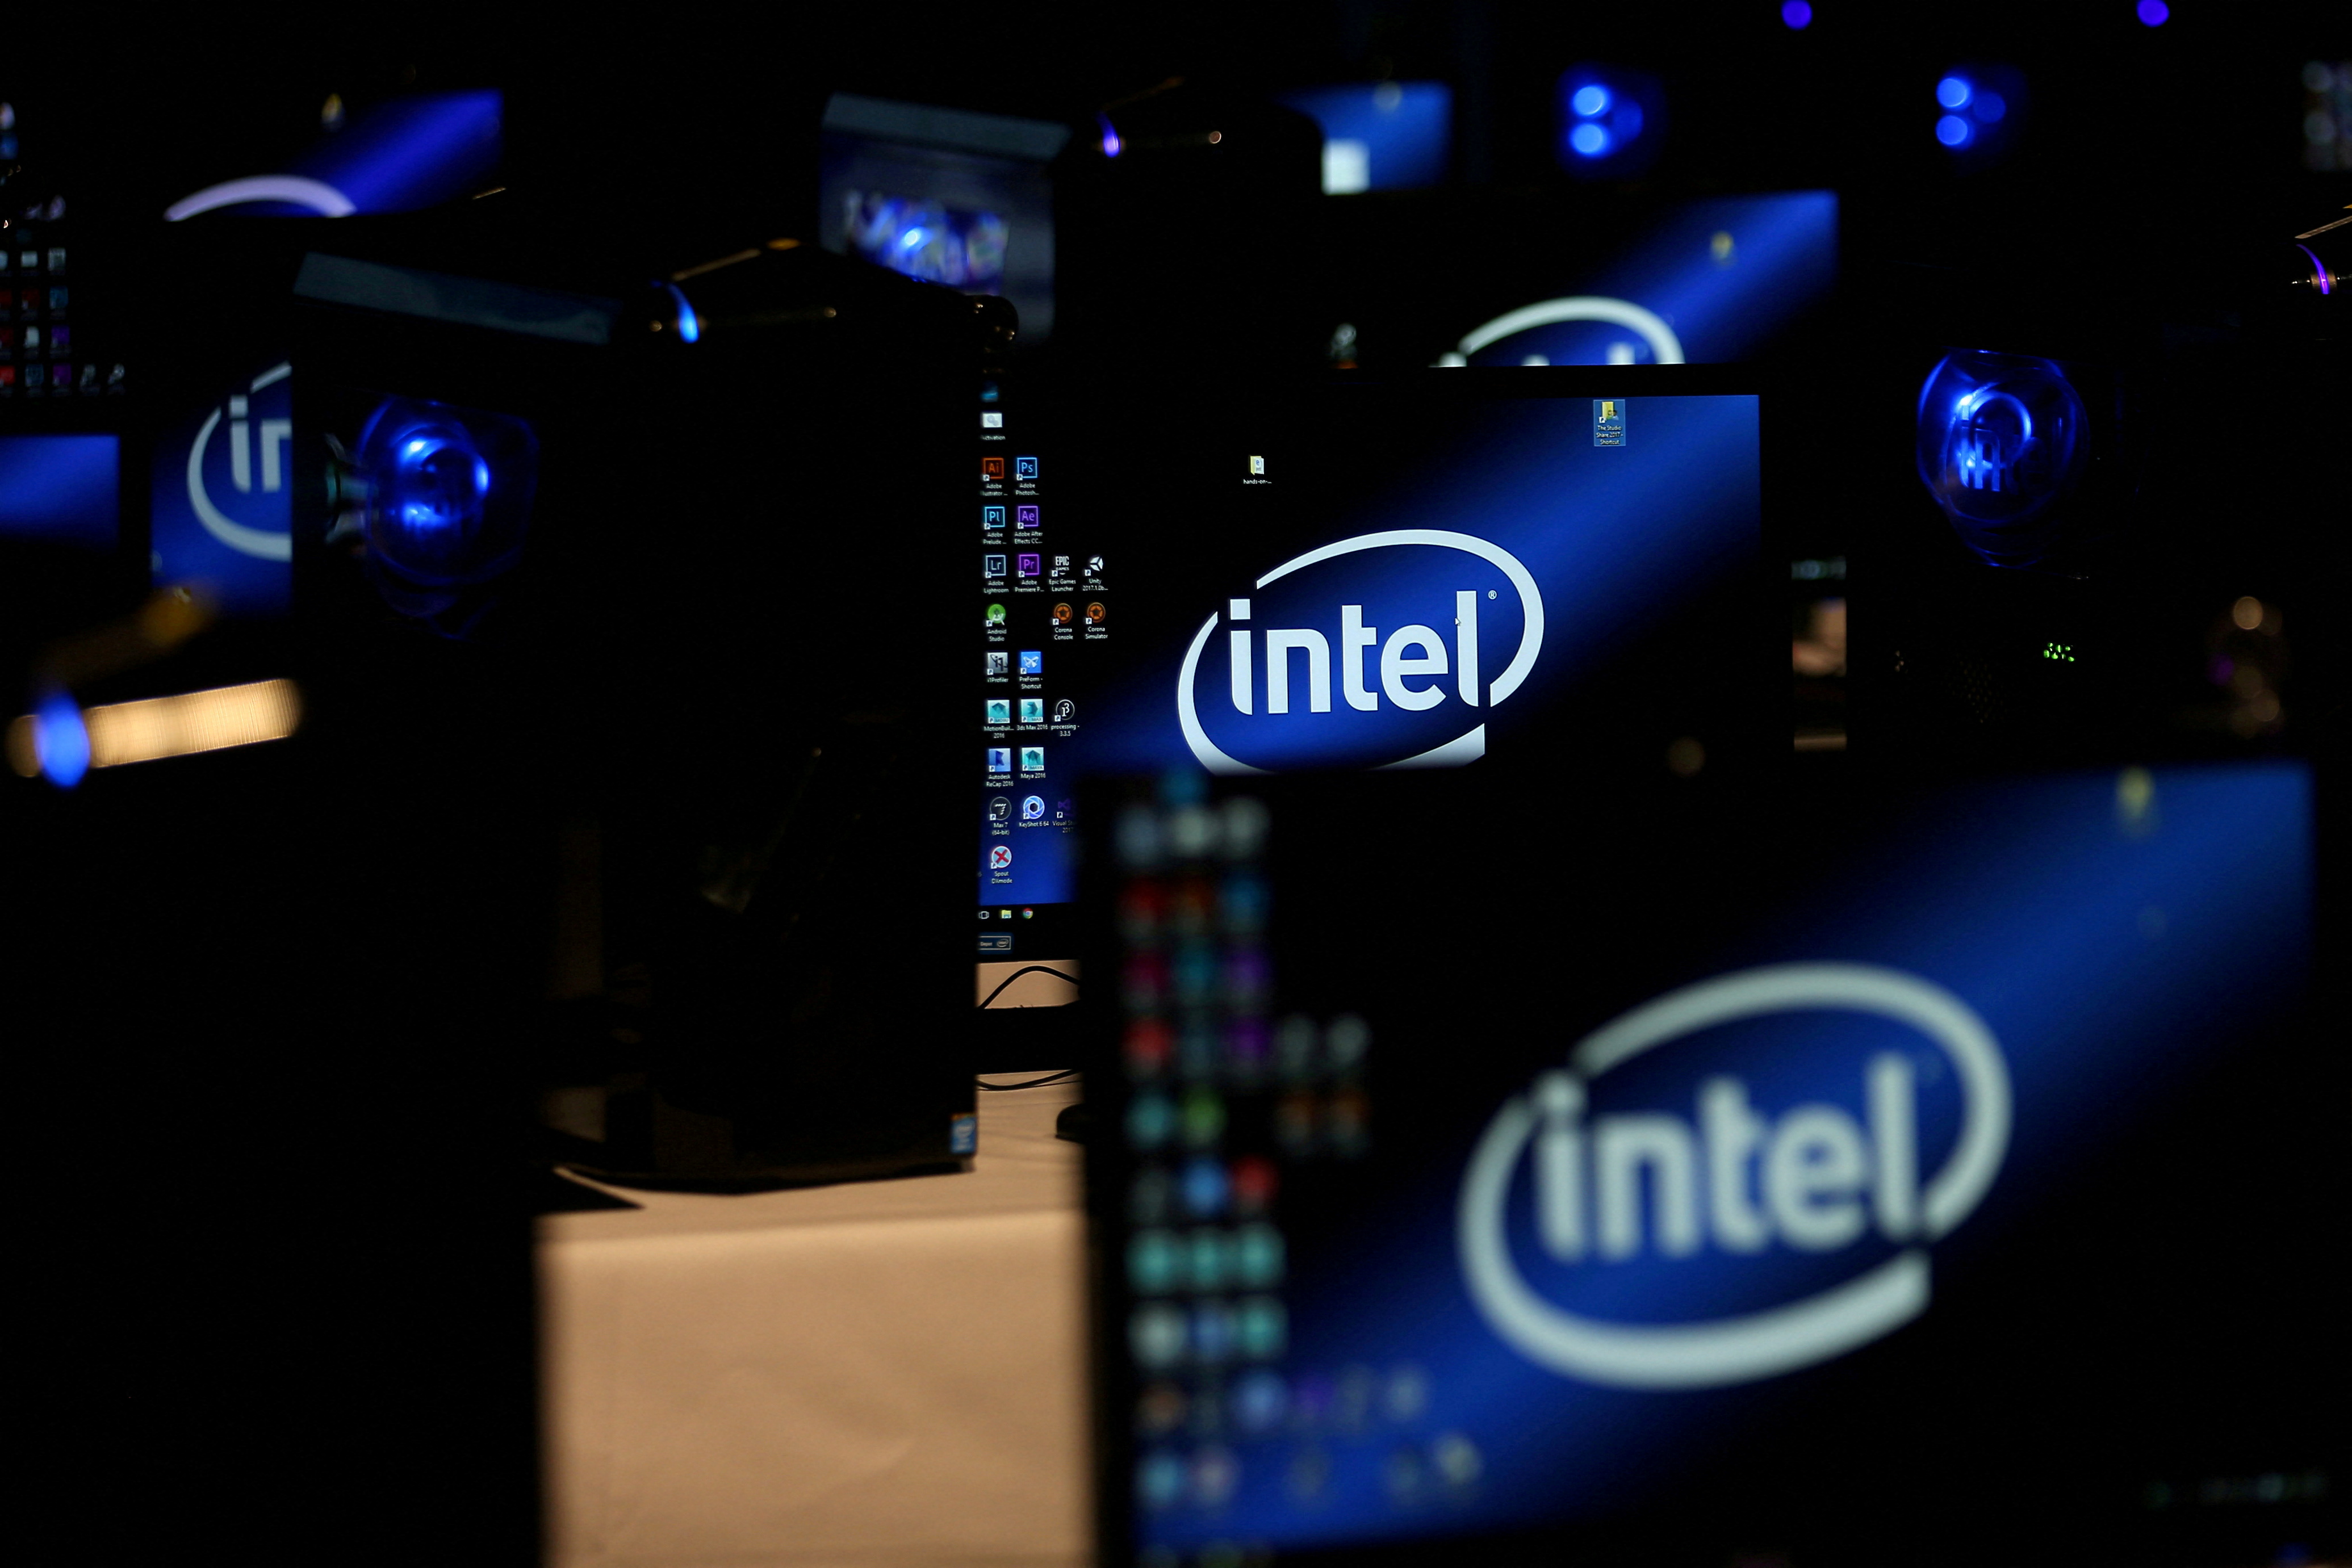 The Intel logo is displayed on computer screens at SIGGRAPH 2017 in Los Angeles, California, U.S. July 31, 2017.  REUTERS/Mike Blake/File Photo